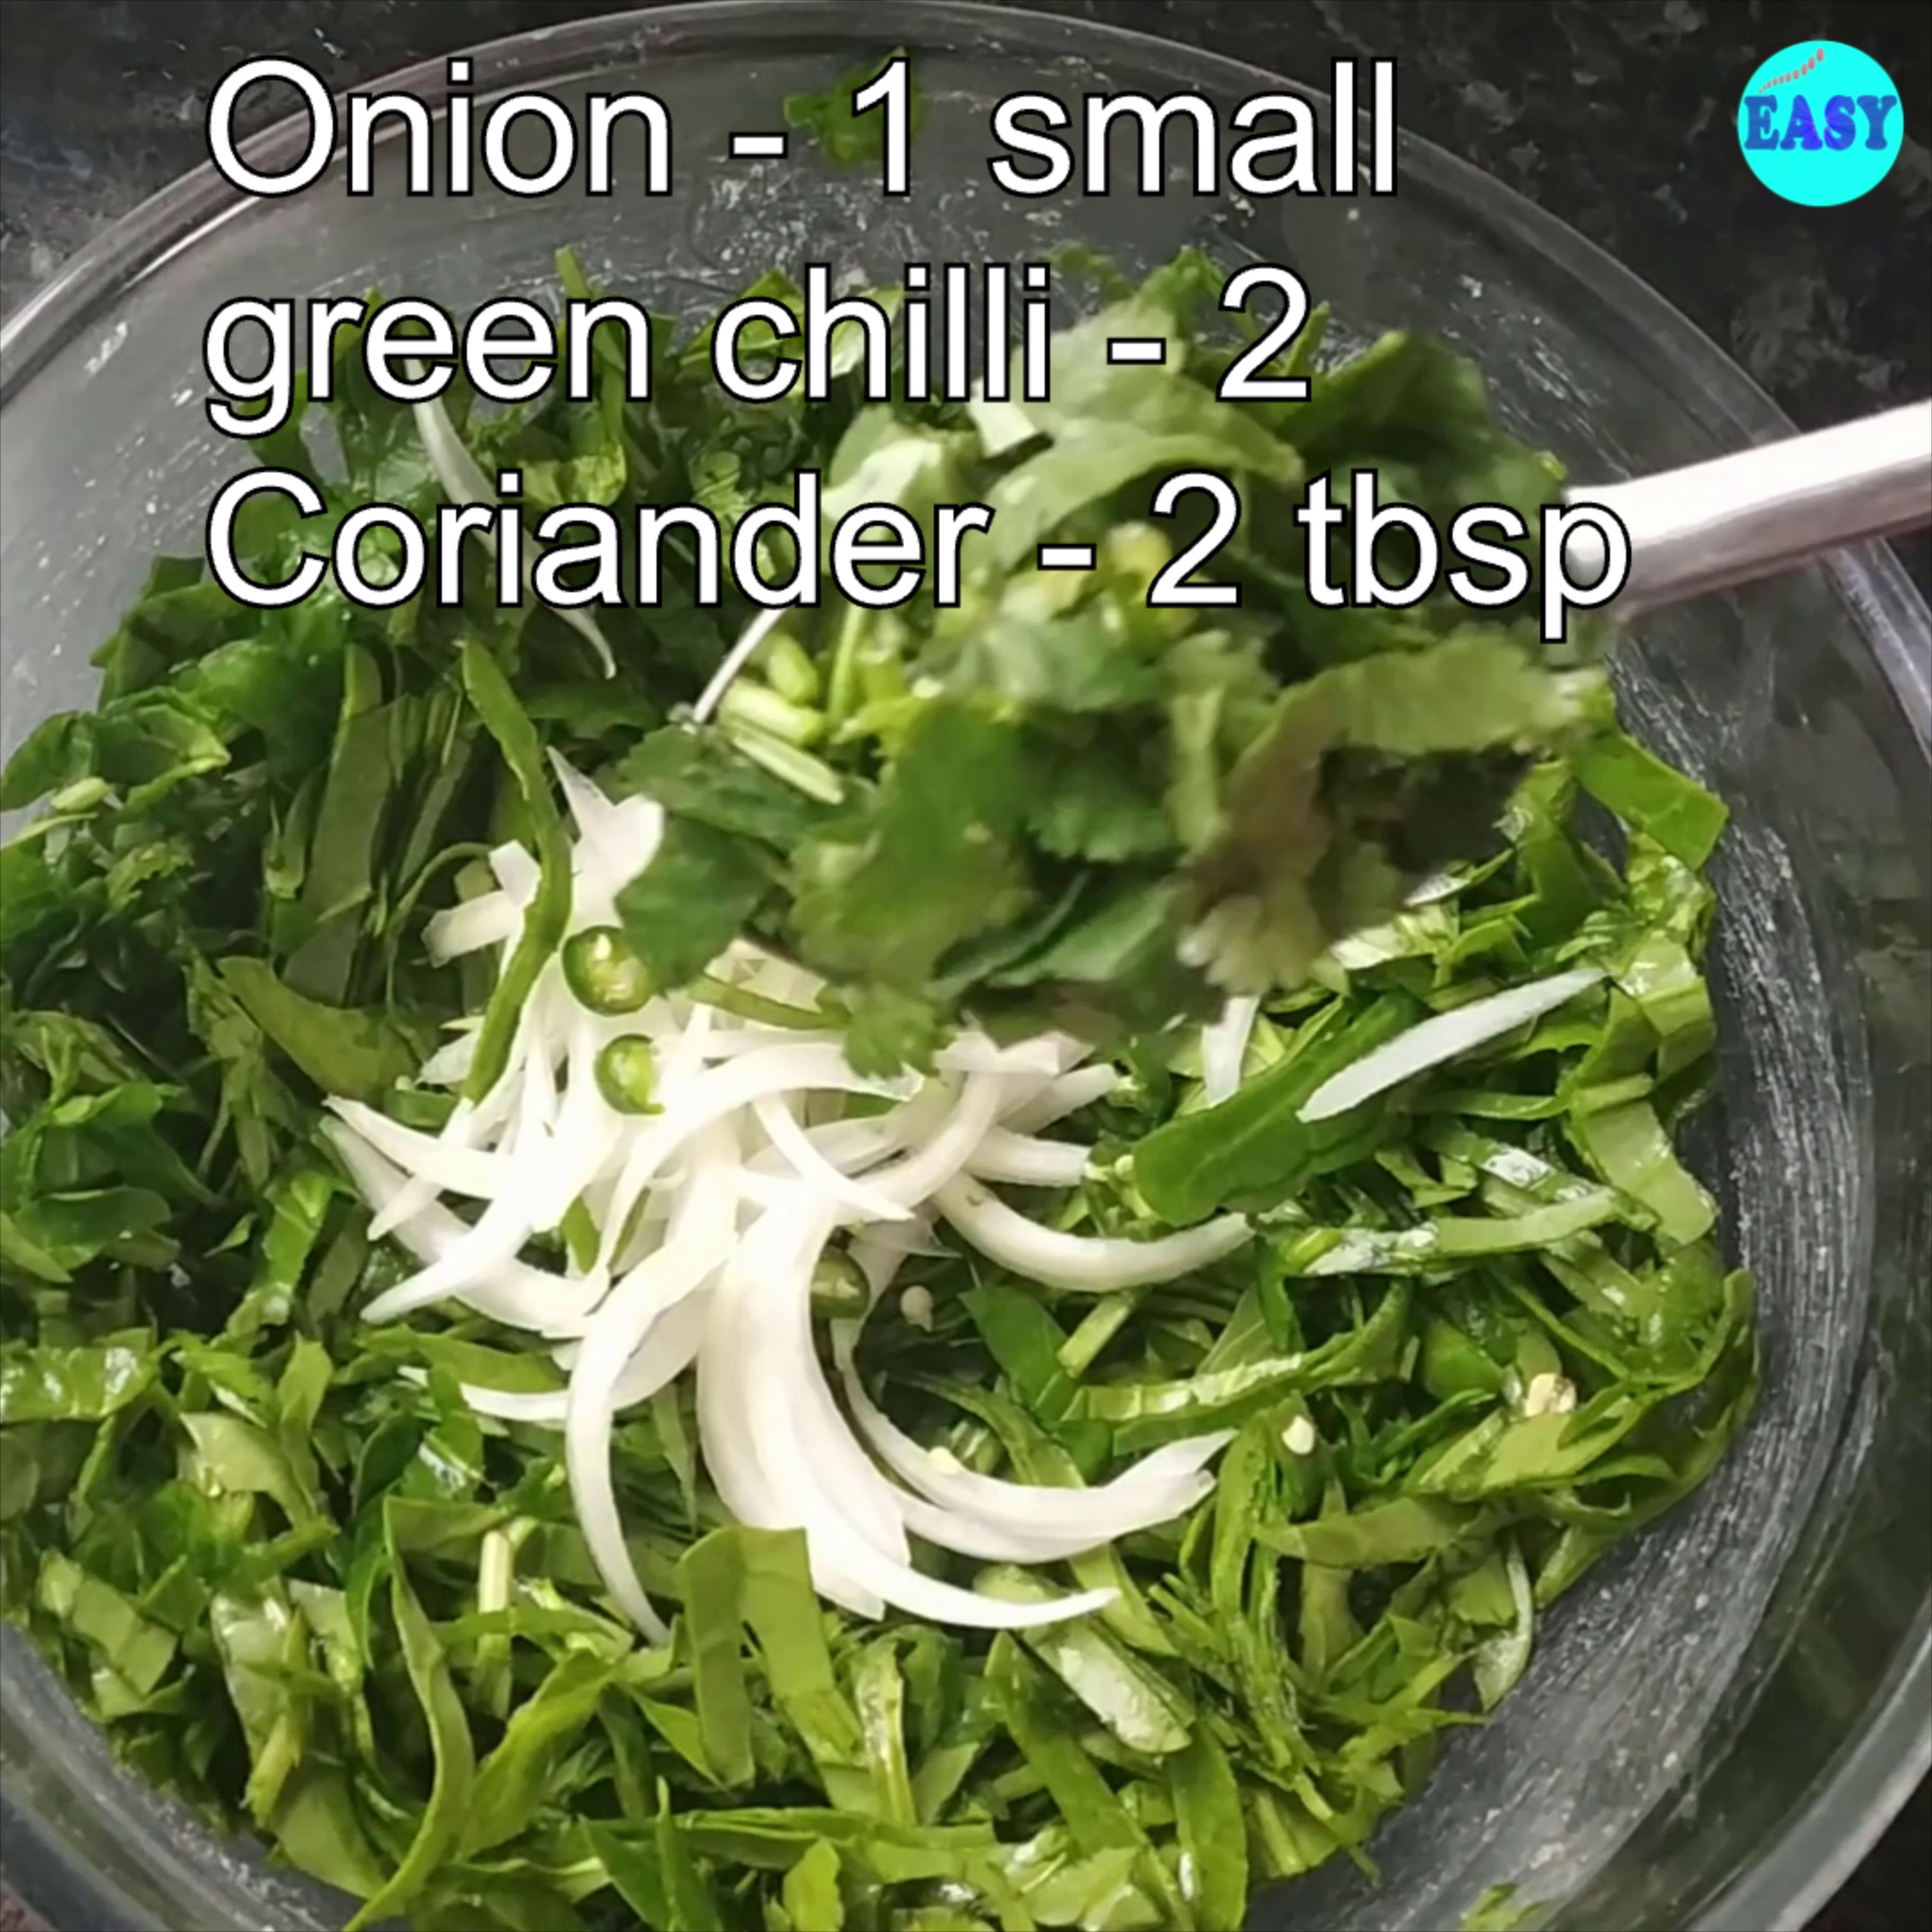 Step 1 - In a big mixing bowl take spinach, onion, green chilli and coriander leaves.